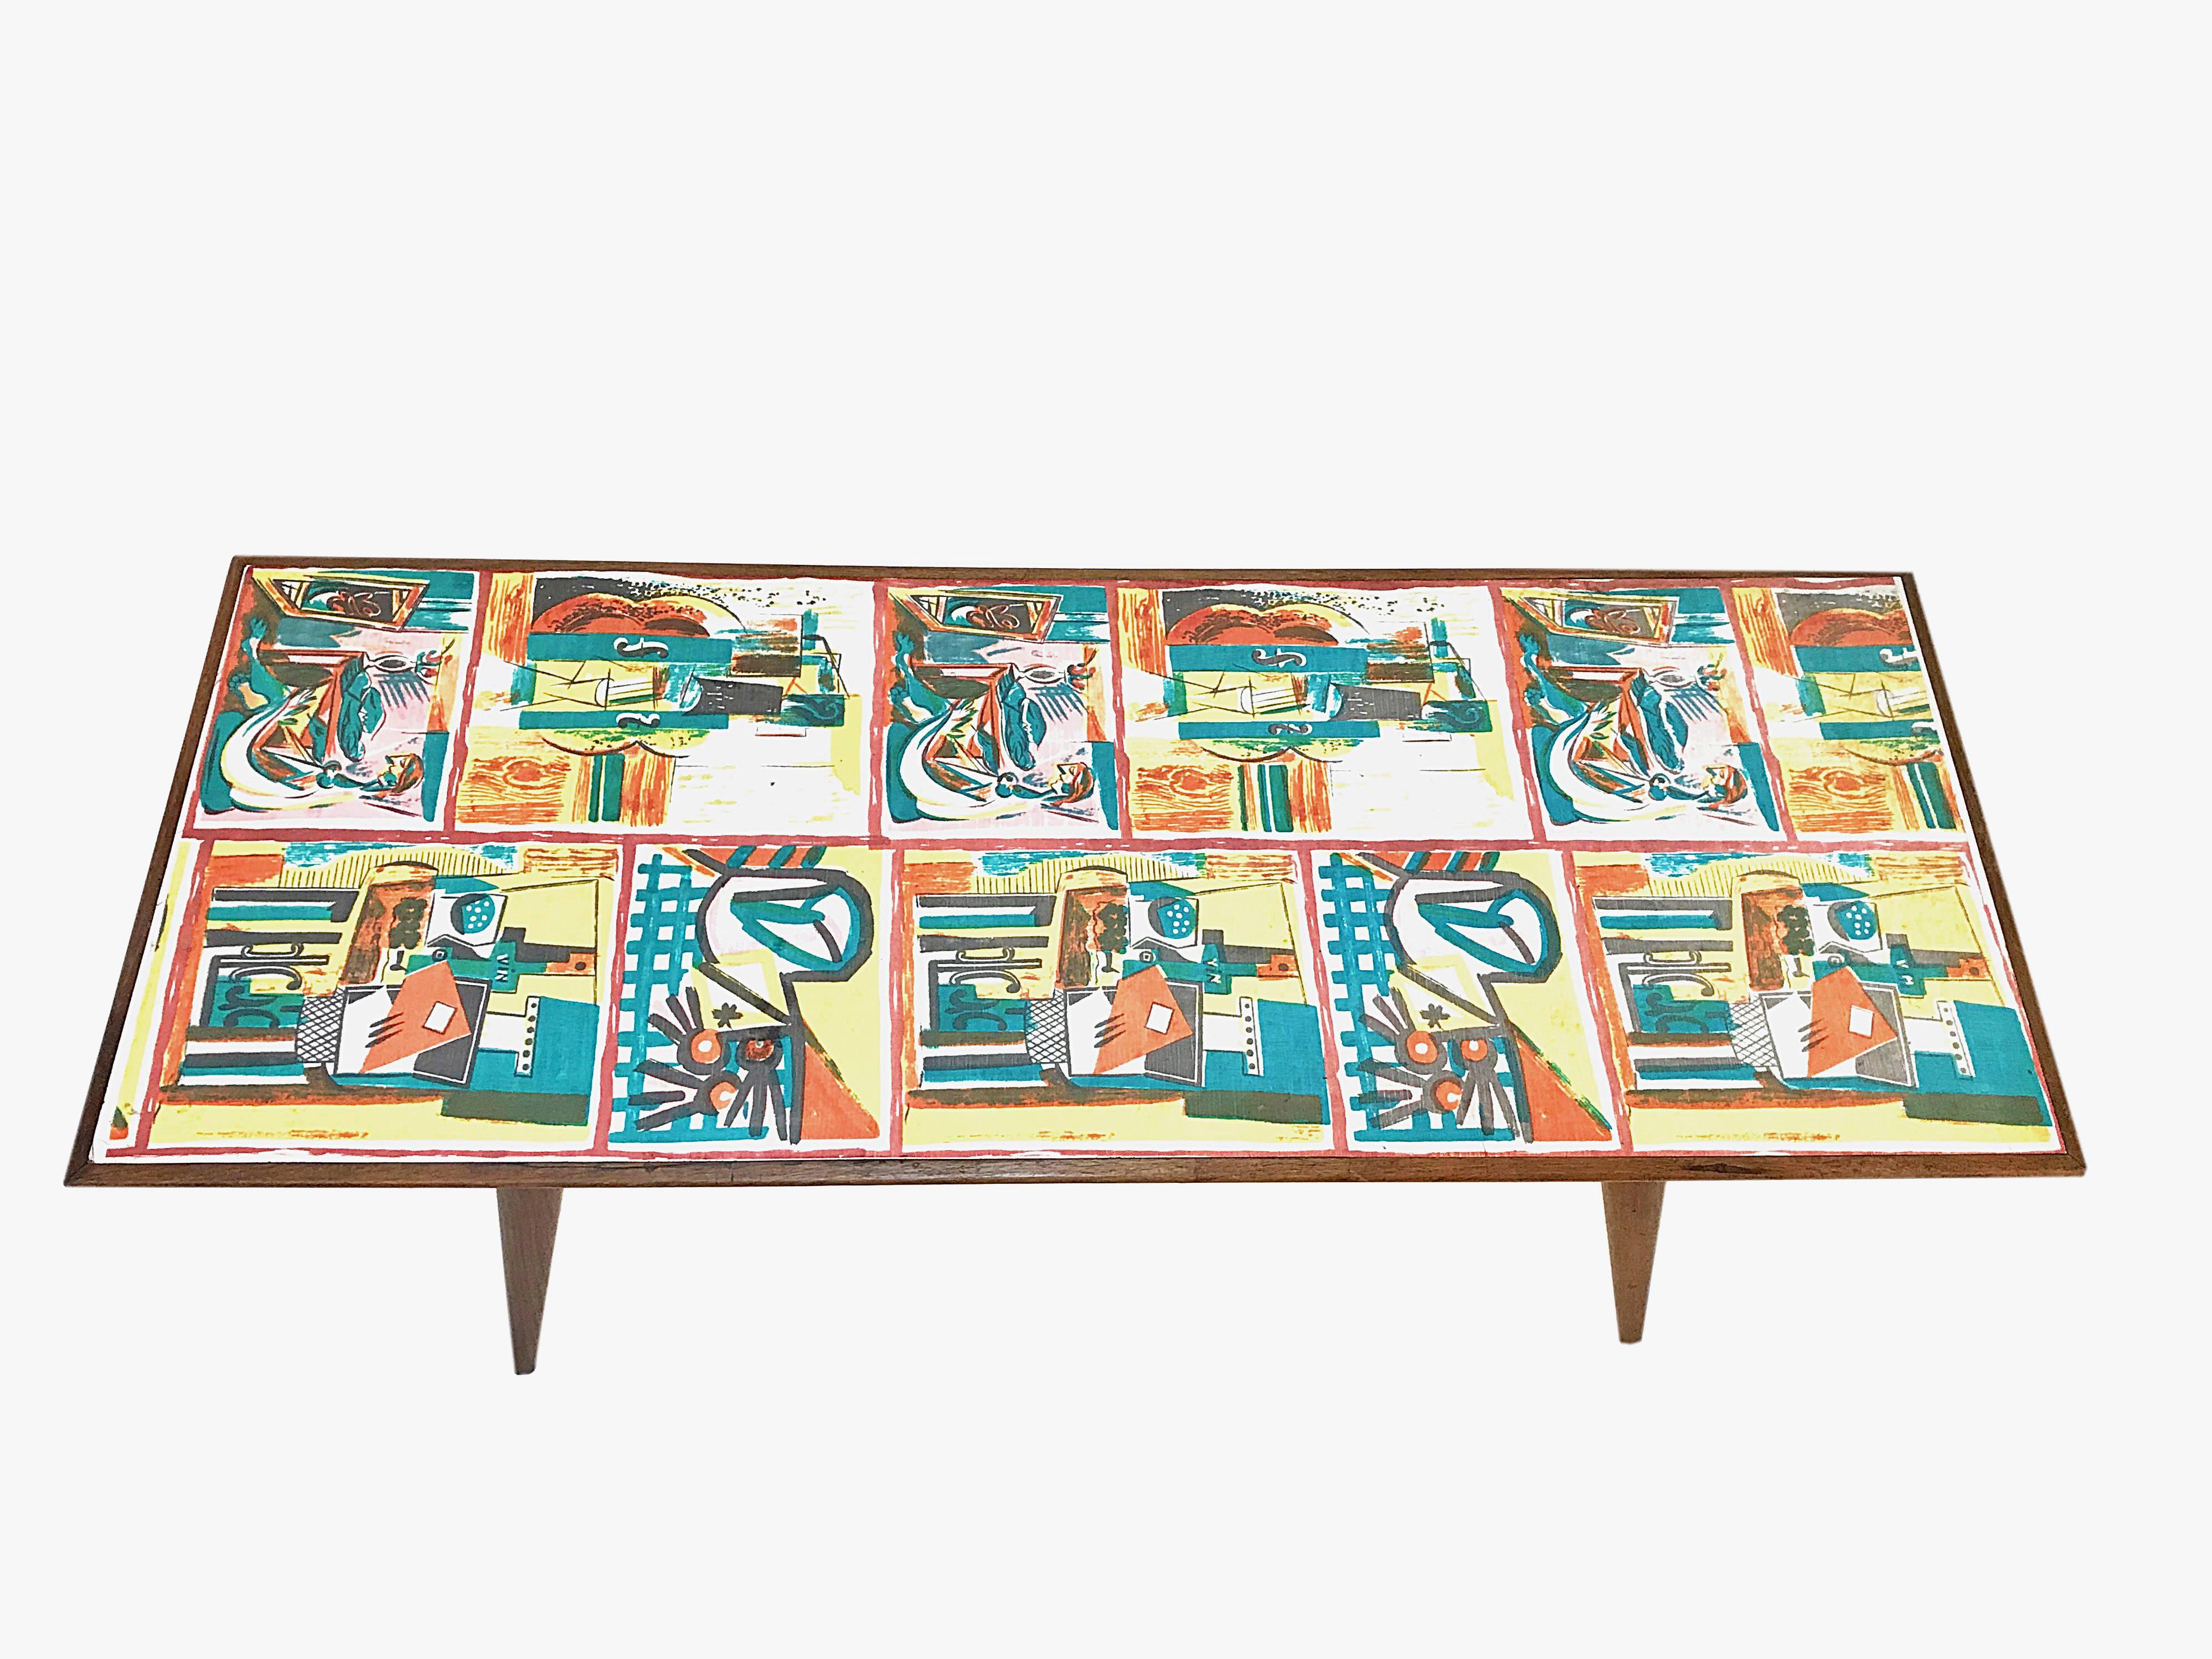 Mid-20th Century Midcentury Printed Wood and Plastic Italian Coffee Table after De Poli, 1950s For Sale